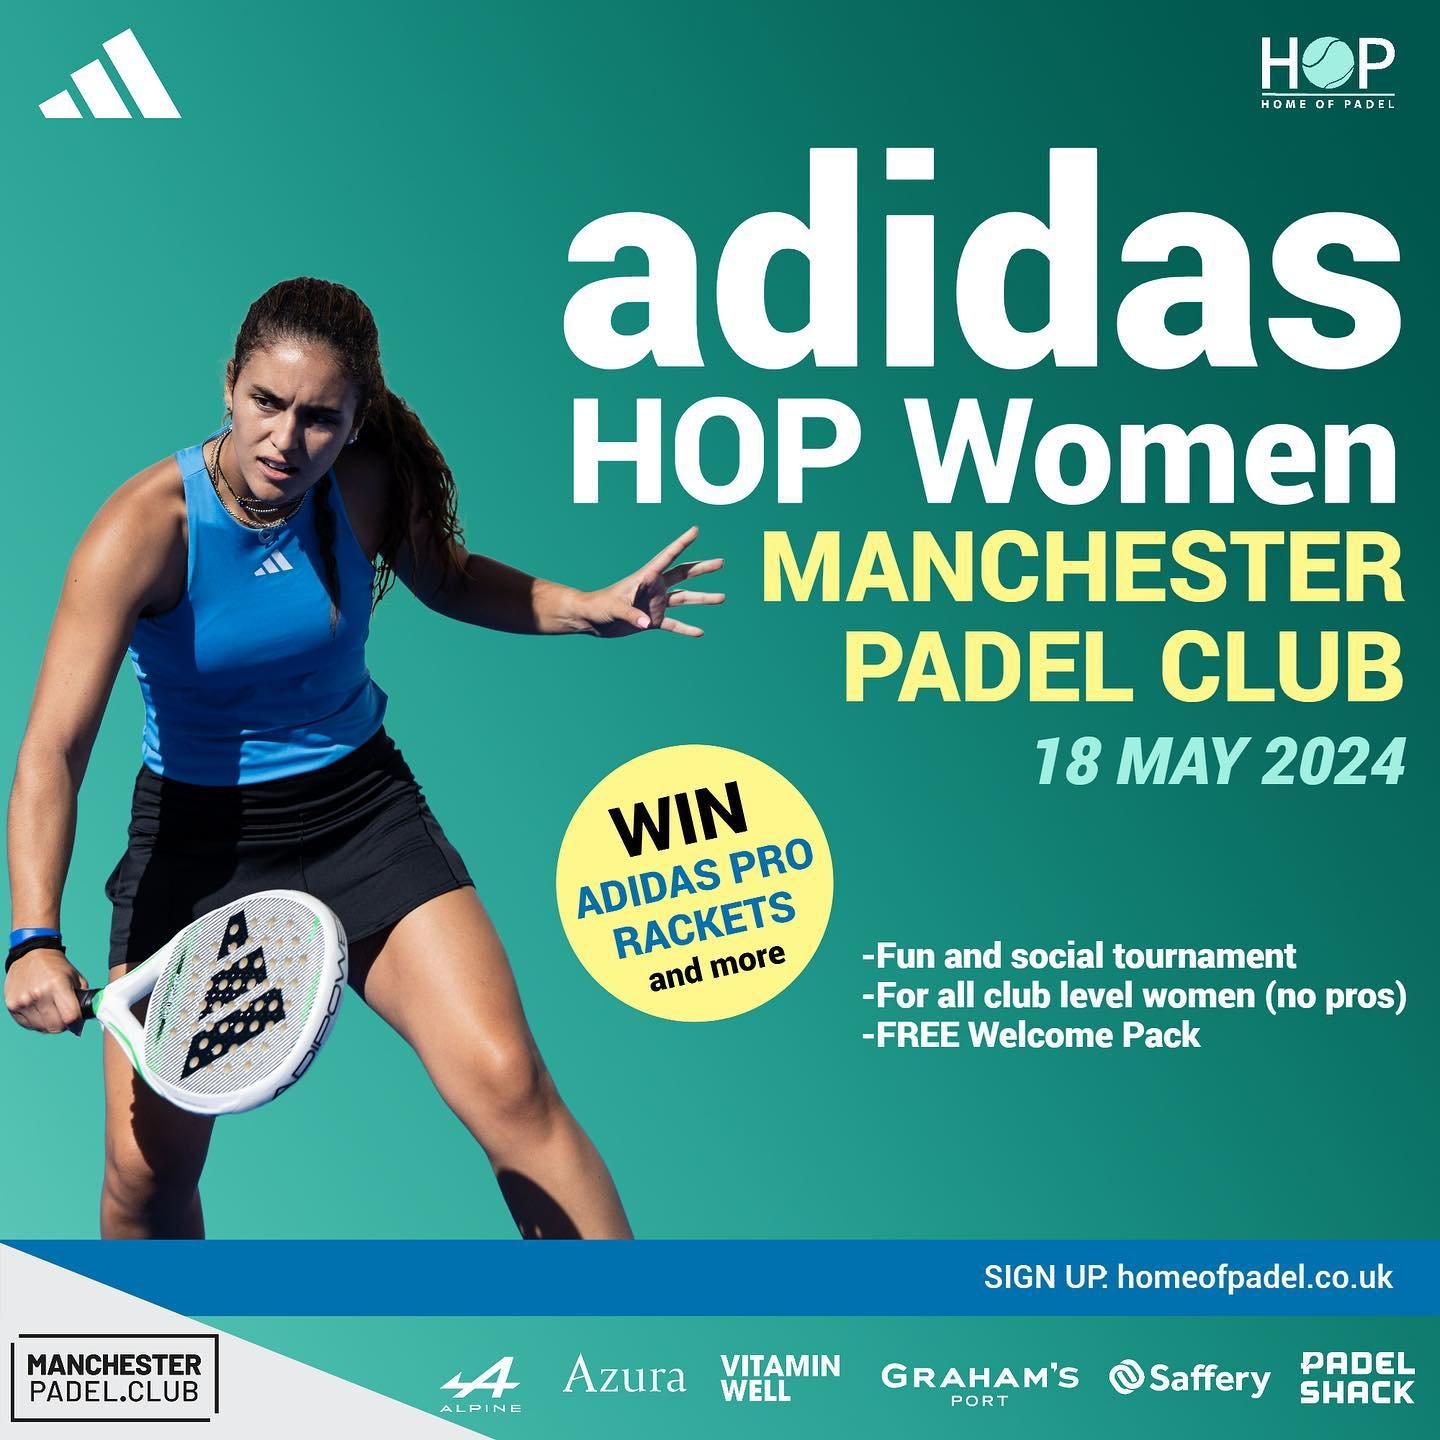 📣 Calling all club-level players 📣

Get ready for the first-ever Manchester tournament of the Adidas HOP Tour, coming to Manchester Padel Club🏆

🎾 Saturday 18th May: Adidas HOP Women Manchester
🎾 Sunday 19th May: Adidas HOP All Pairings

Click t